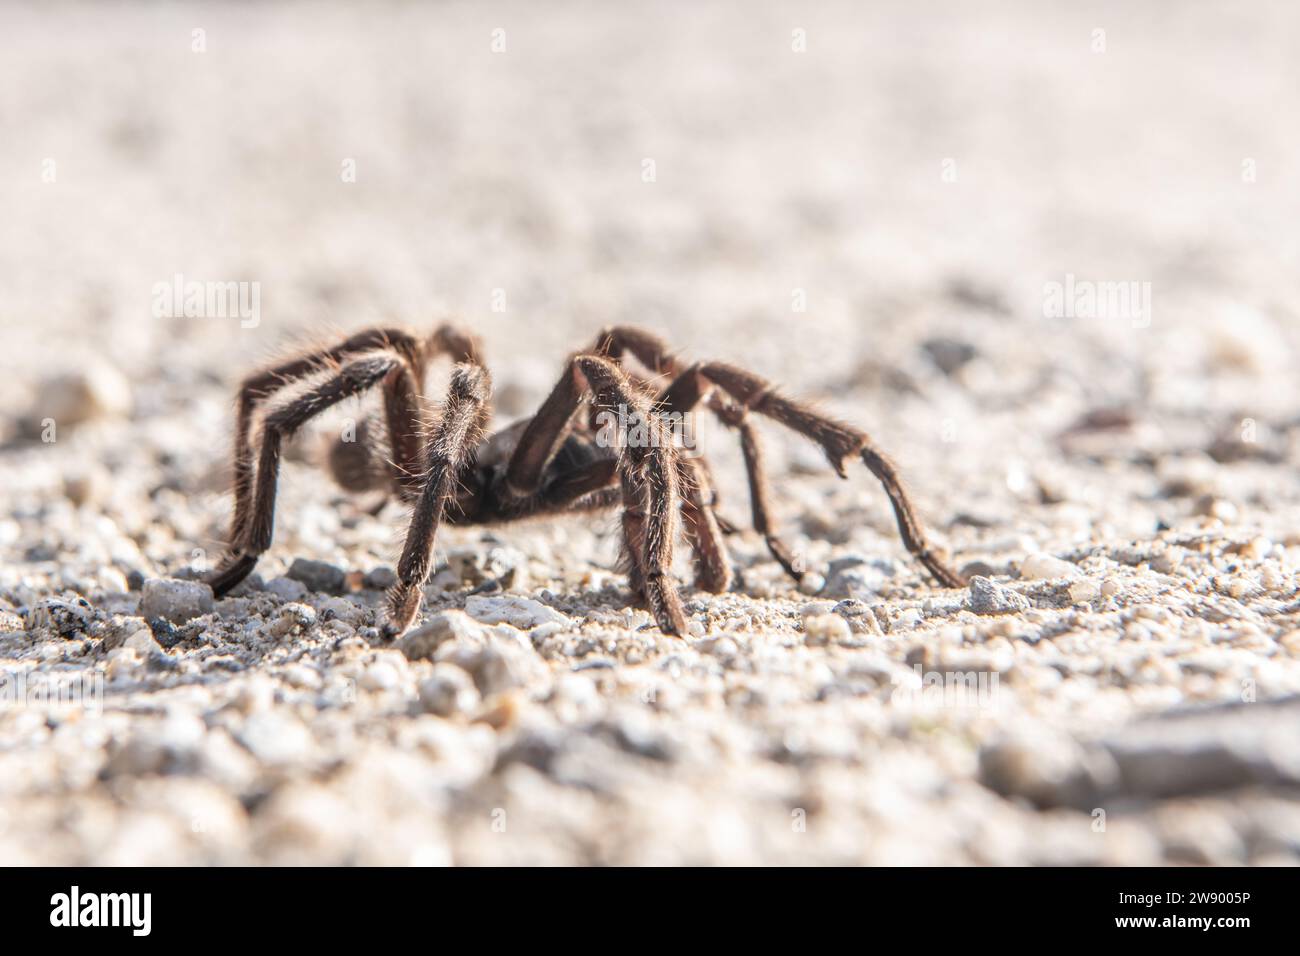 Male Desert Tarantula, Aphonopelma iodius, crossing a road during the spiders migration where they come into the open to look for mates in California. Stock Photo